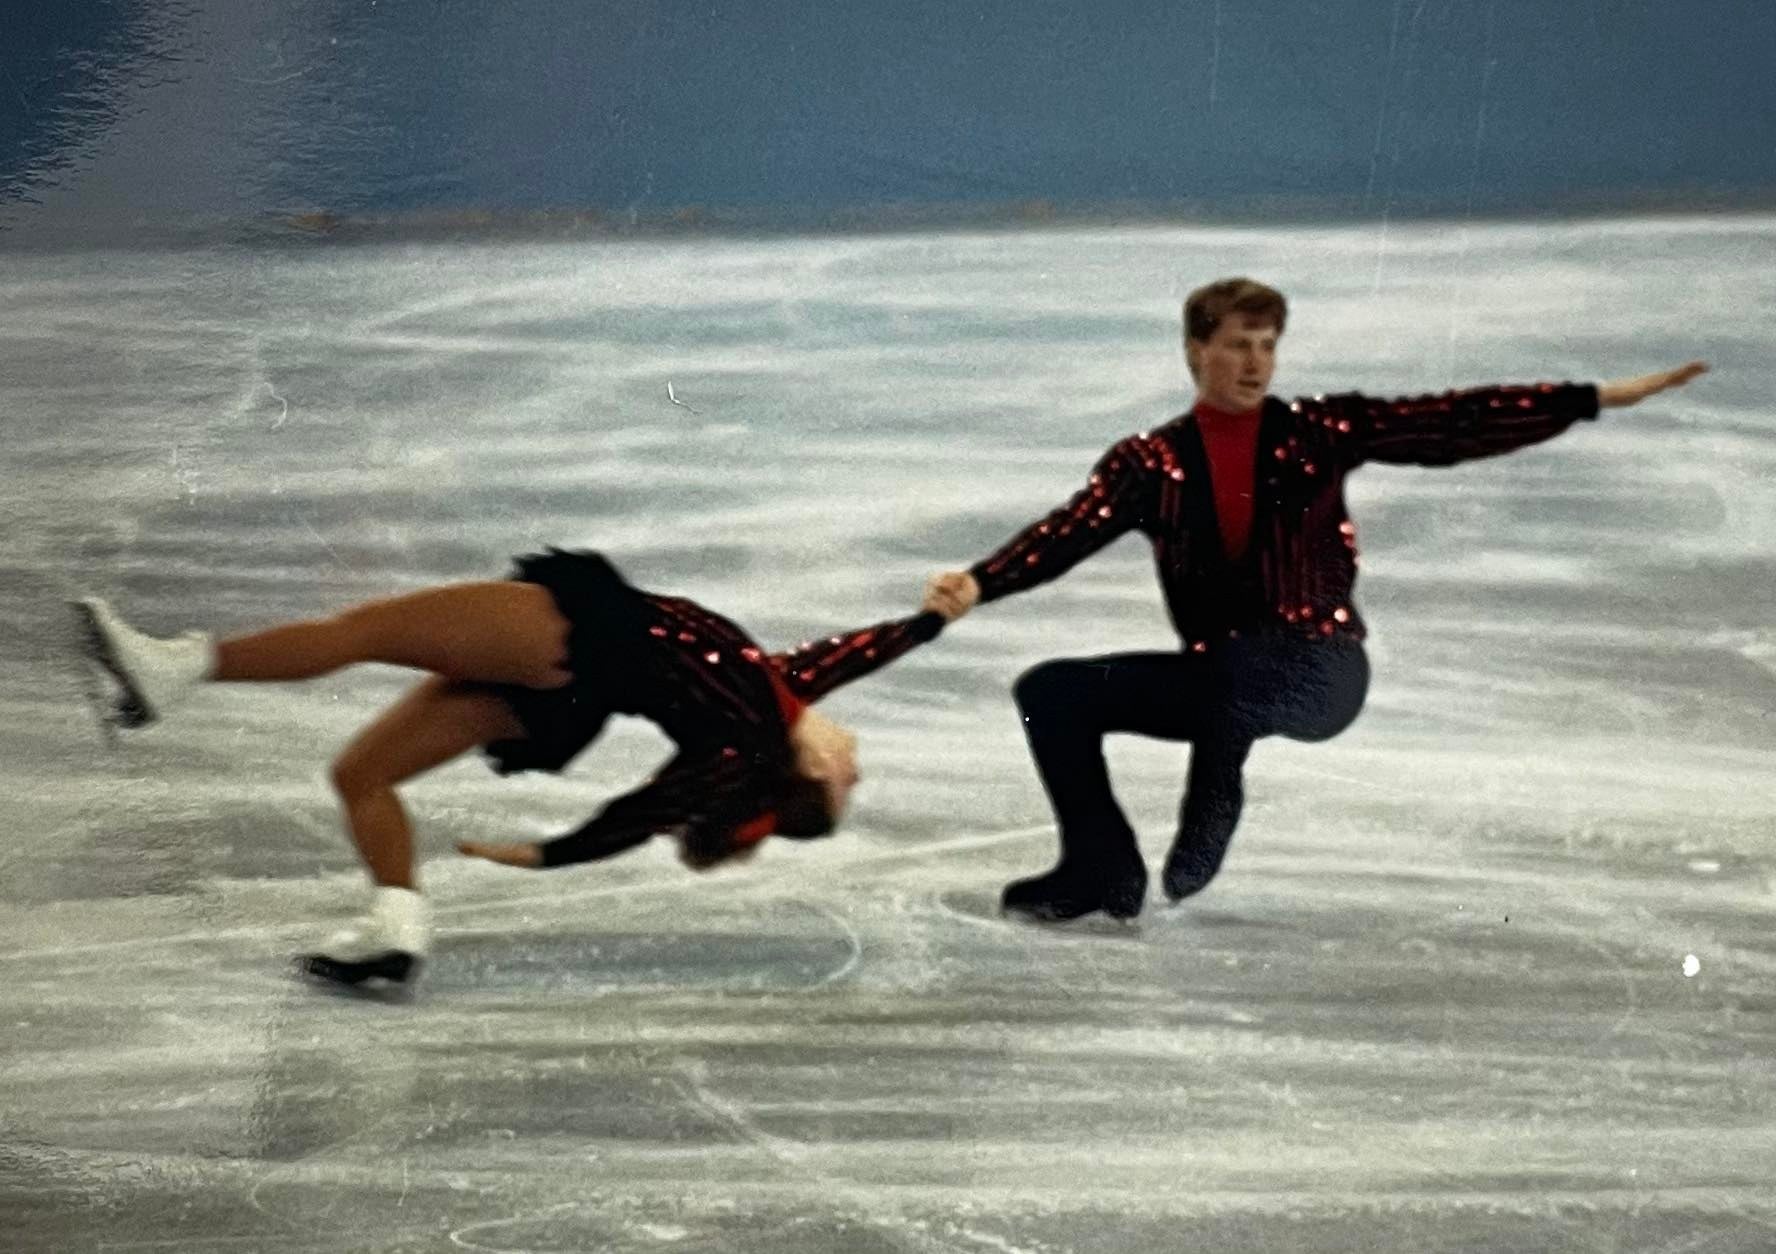 I was a professional figure skater who got dropped on my head